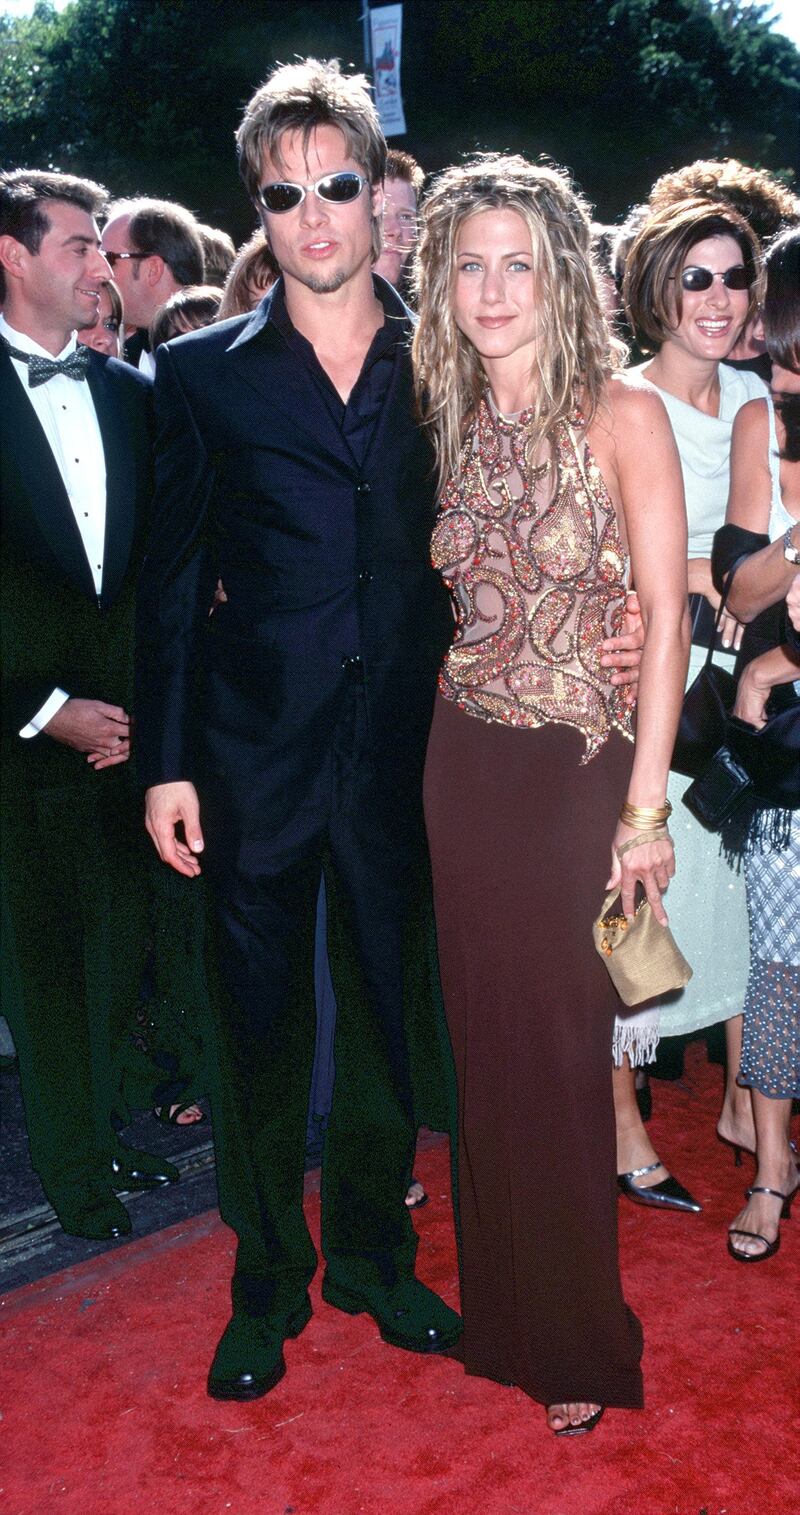 9/12/99 Los Angeles, CA. Brad Pitt and Jennifer Aniston at the 51st Annual primetime Emmy Awards . Photo by Brenda Chase/Online USA, Inc.